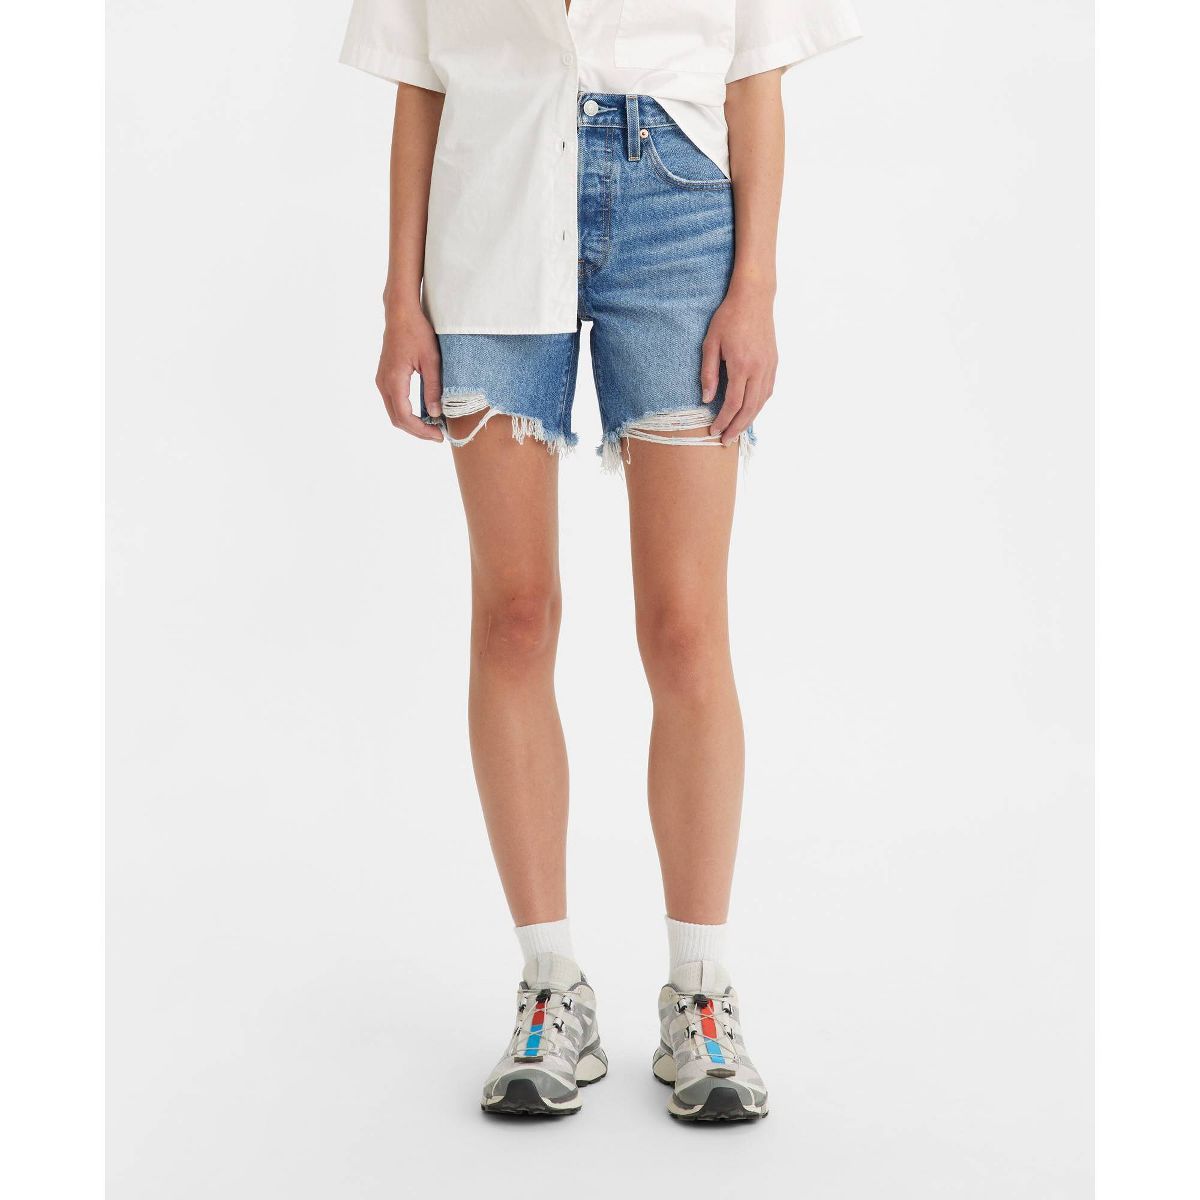 Levi's 501® Mid Thigh Women's Jean Shorts - Well Sure 28 | Target